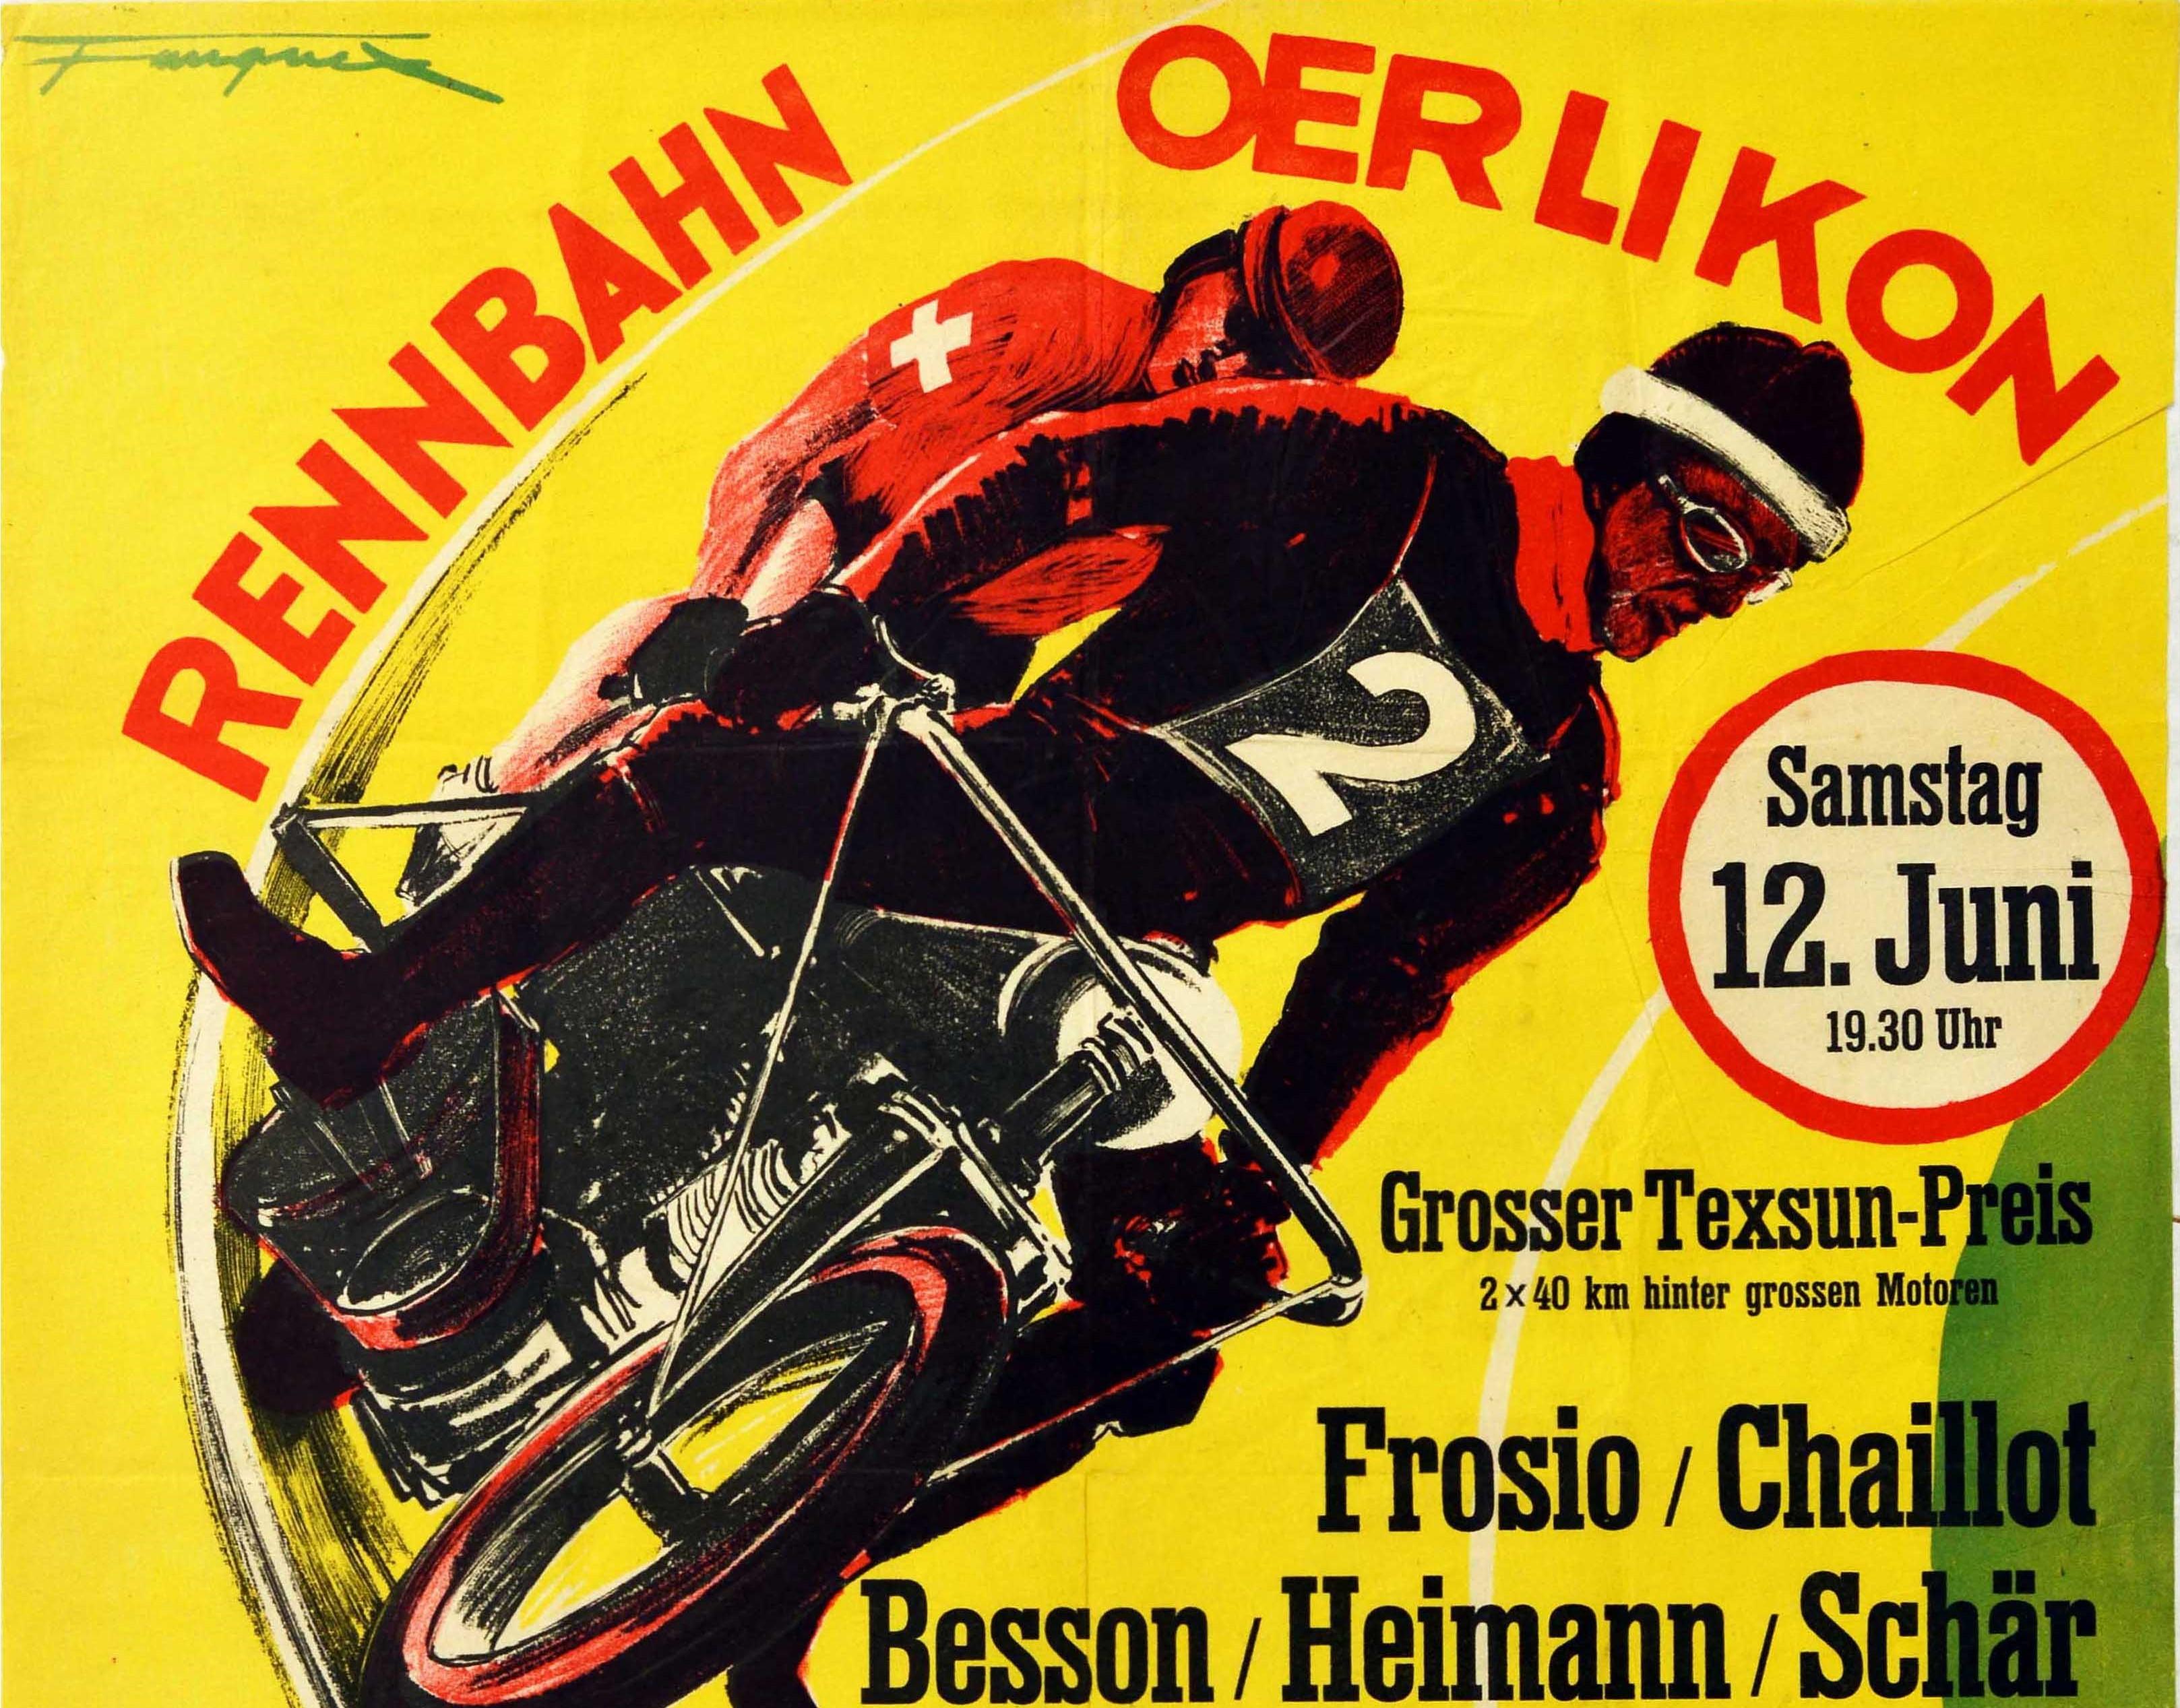 Original vintage motor cycling sport poster for the Rennbahn Oerlikon race featuring an illustration of a man on a motorcycle speeding along the velodrome track in front of a cyclist with the title text and information on the yellow background,